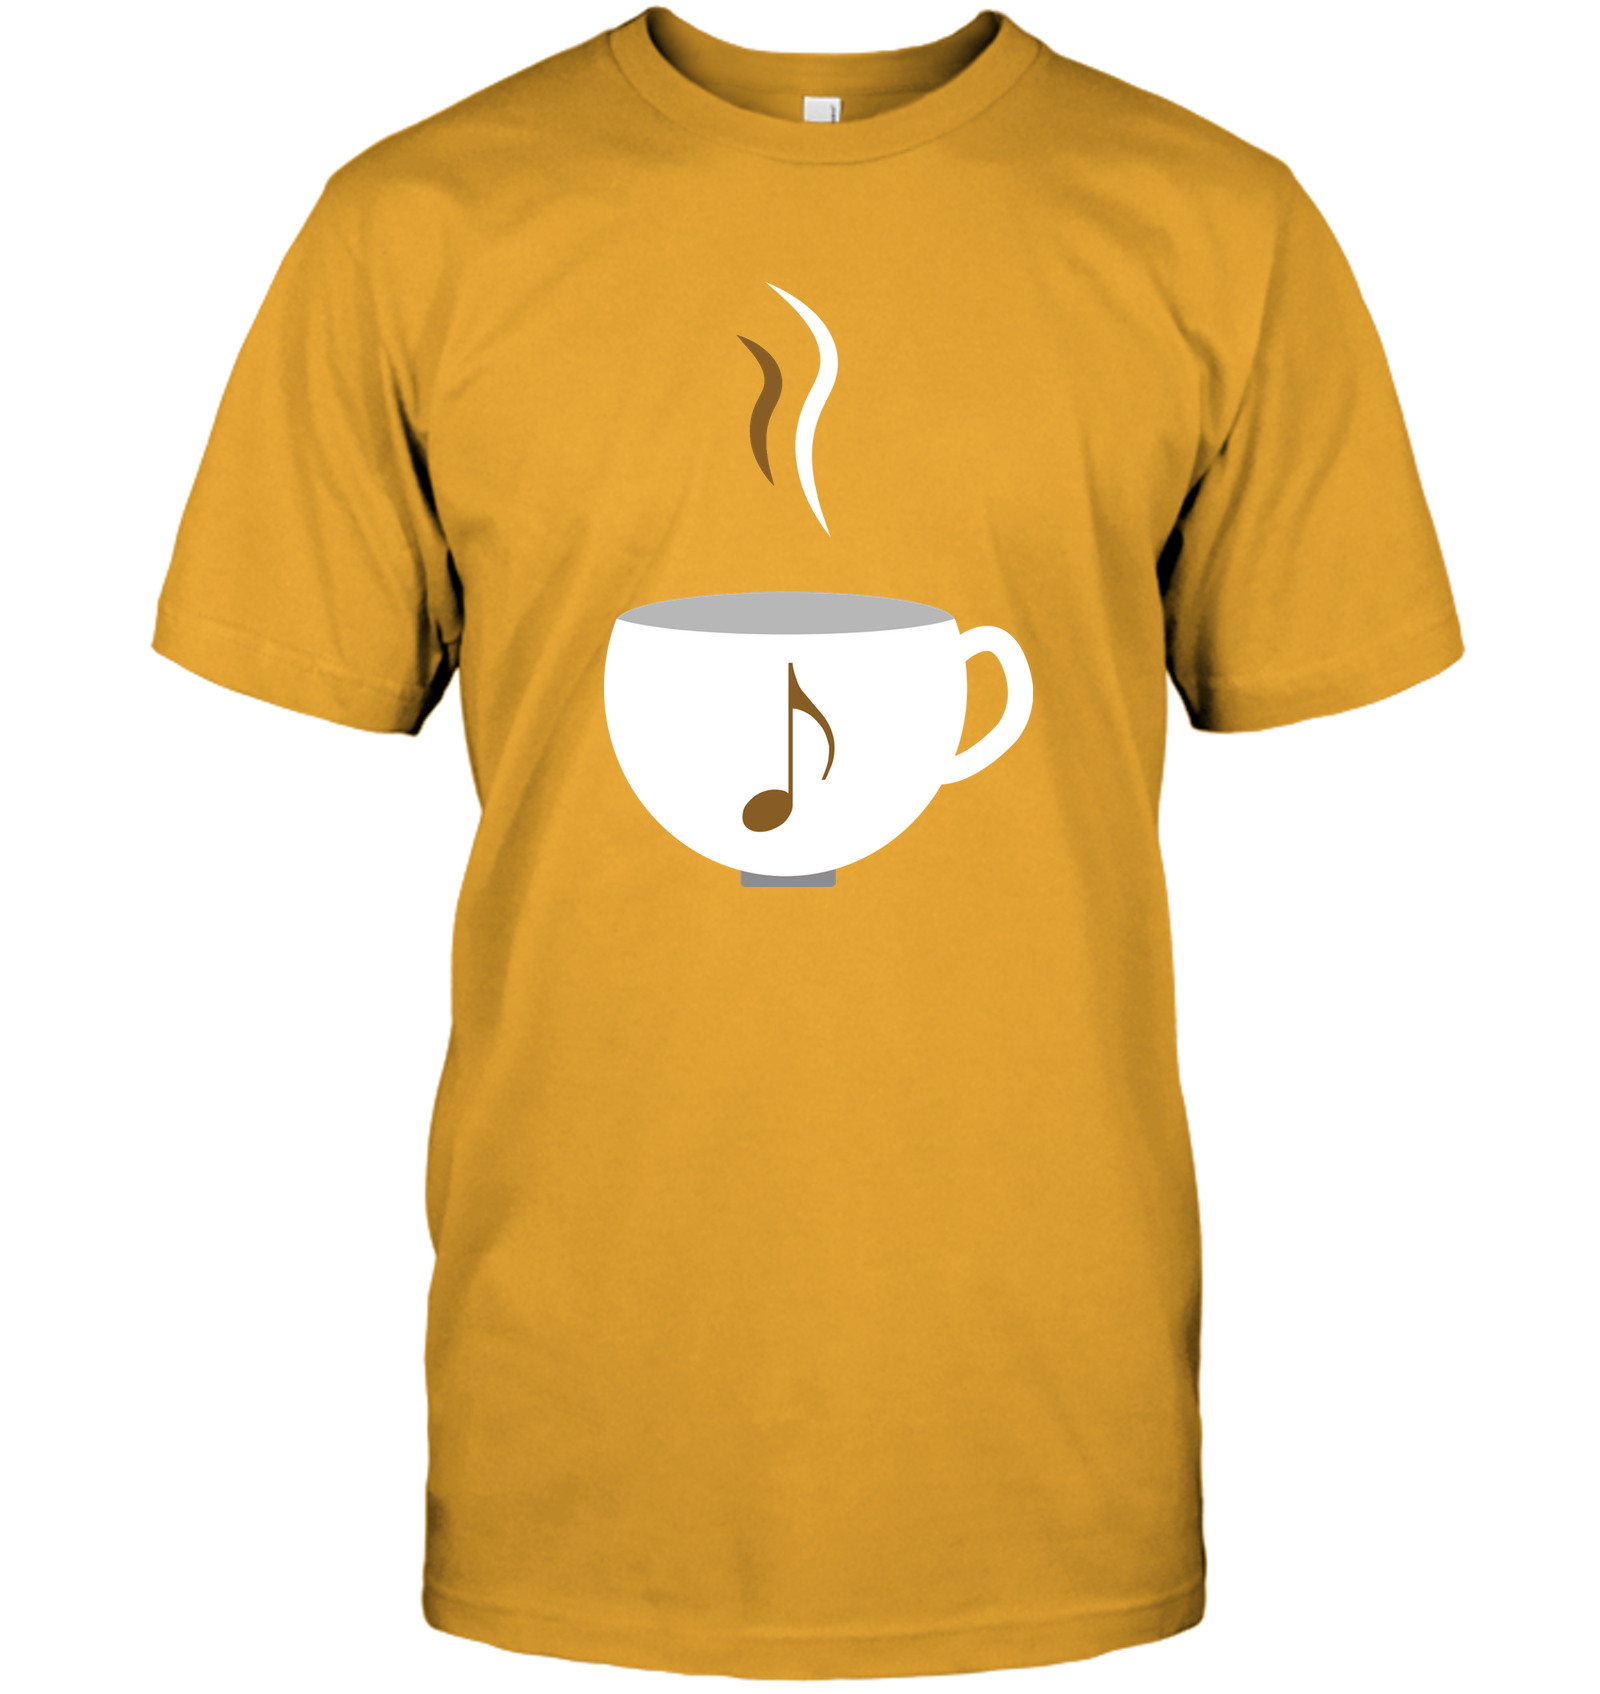 I Love Coffee with a splash of music - Hanes Adult Tagless® T-Shirt